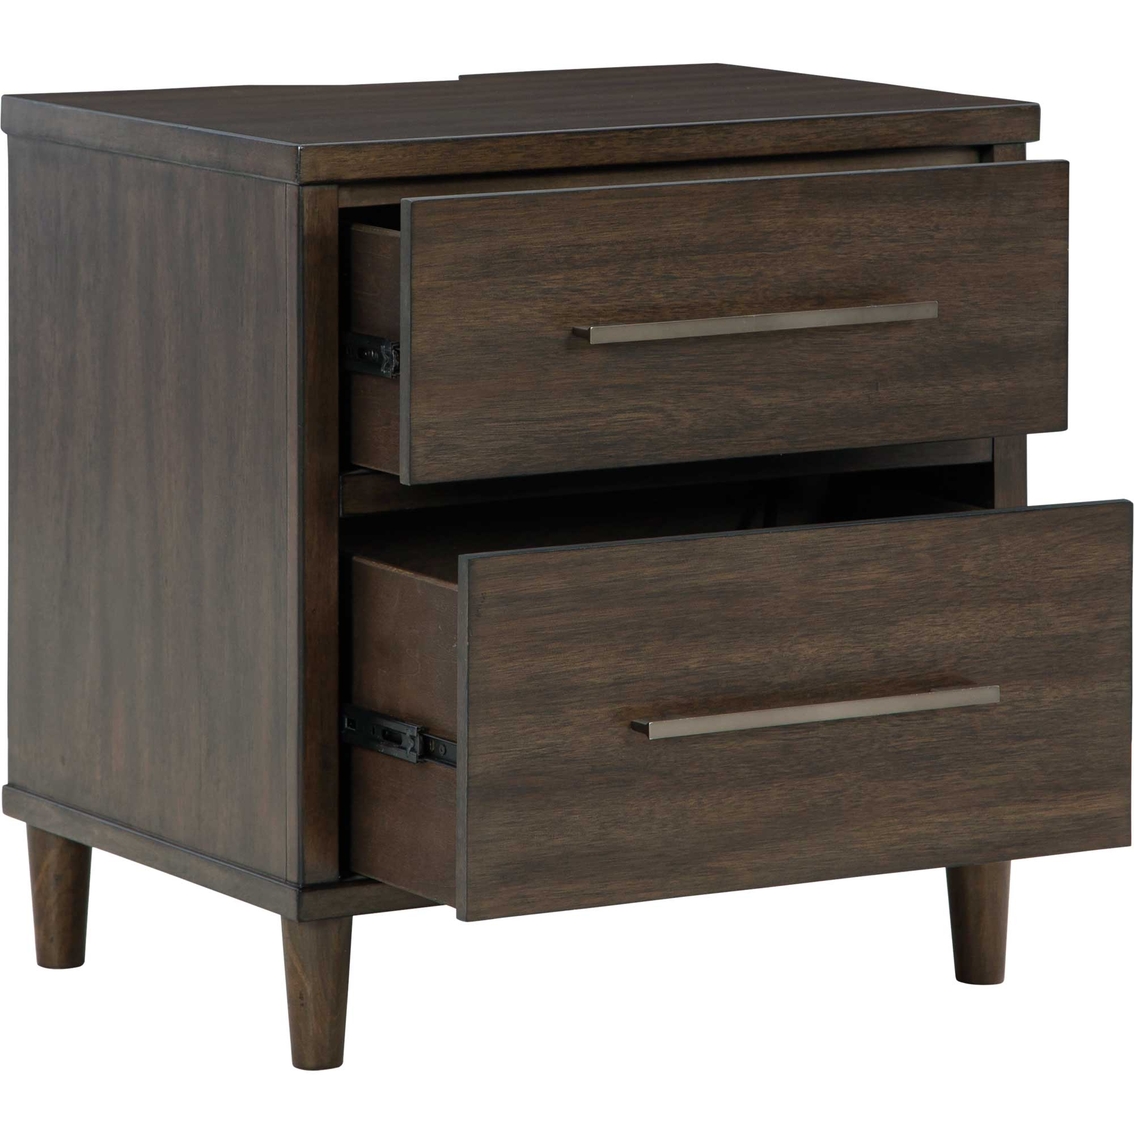 Signature Design by Ashley Wittland Nightstand - Image 4 of 7